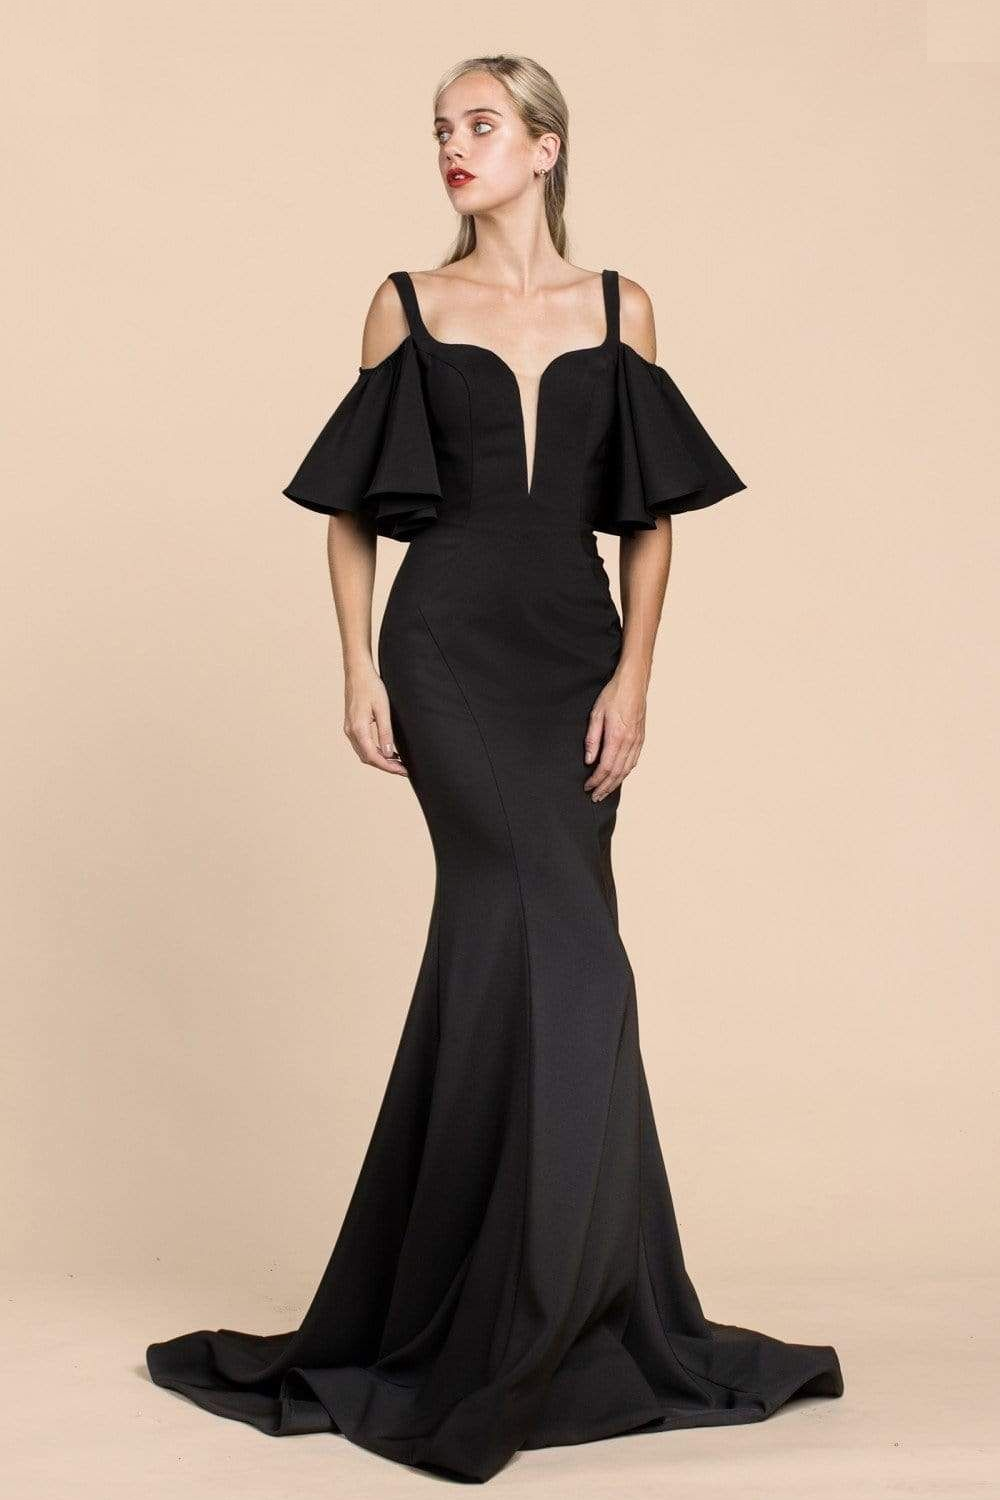 Long Square Neckline Evening Gown